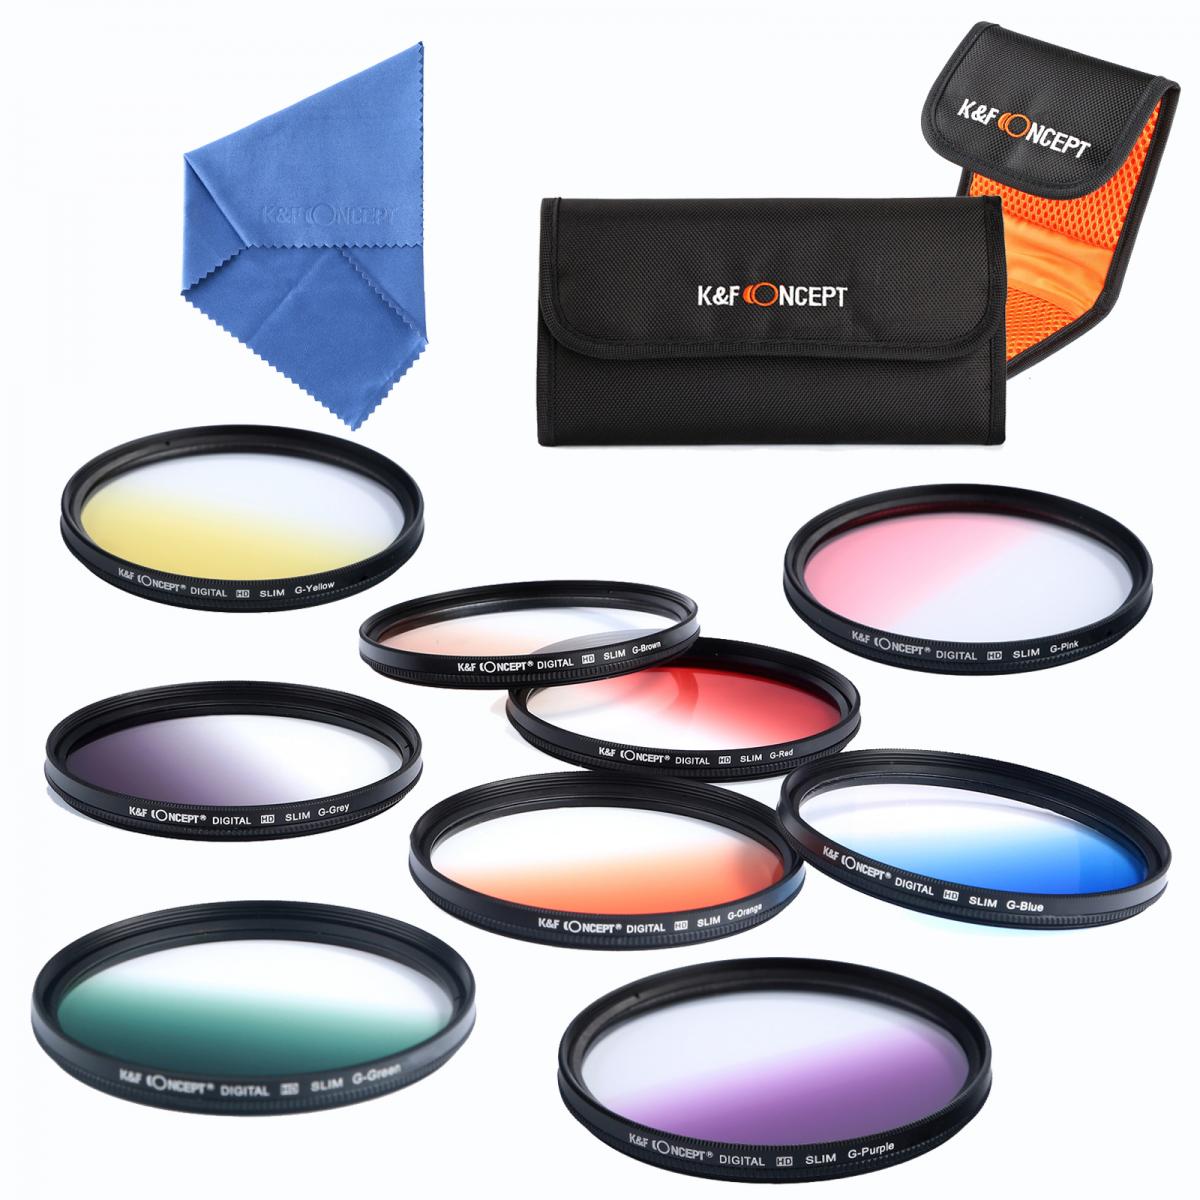 Image of K&F Concept 62mm Filter Set (Graduated Orange, Blue, Grey, Red, Purple, Green, Pink, Brown, Yellow)